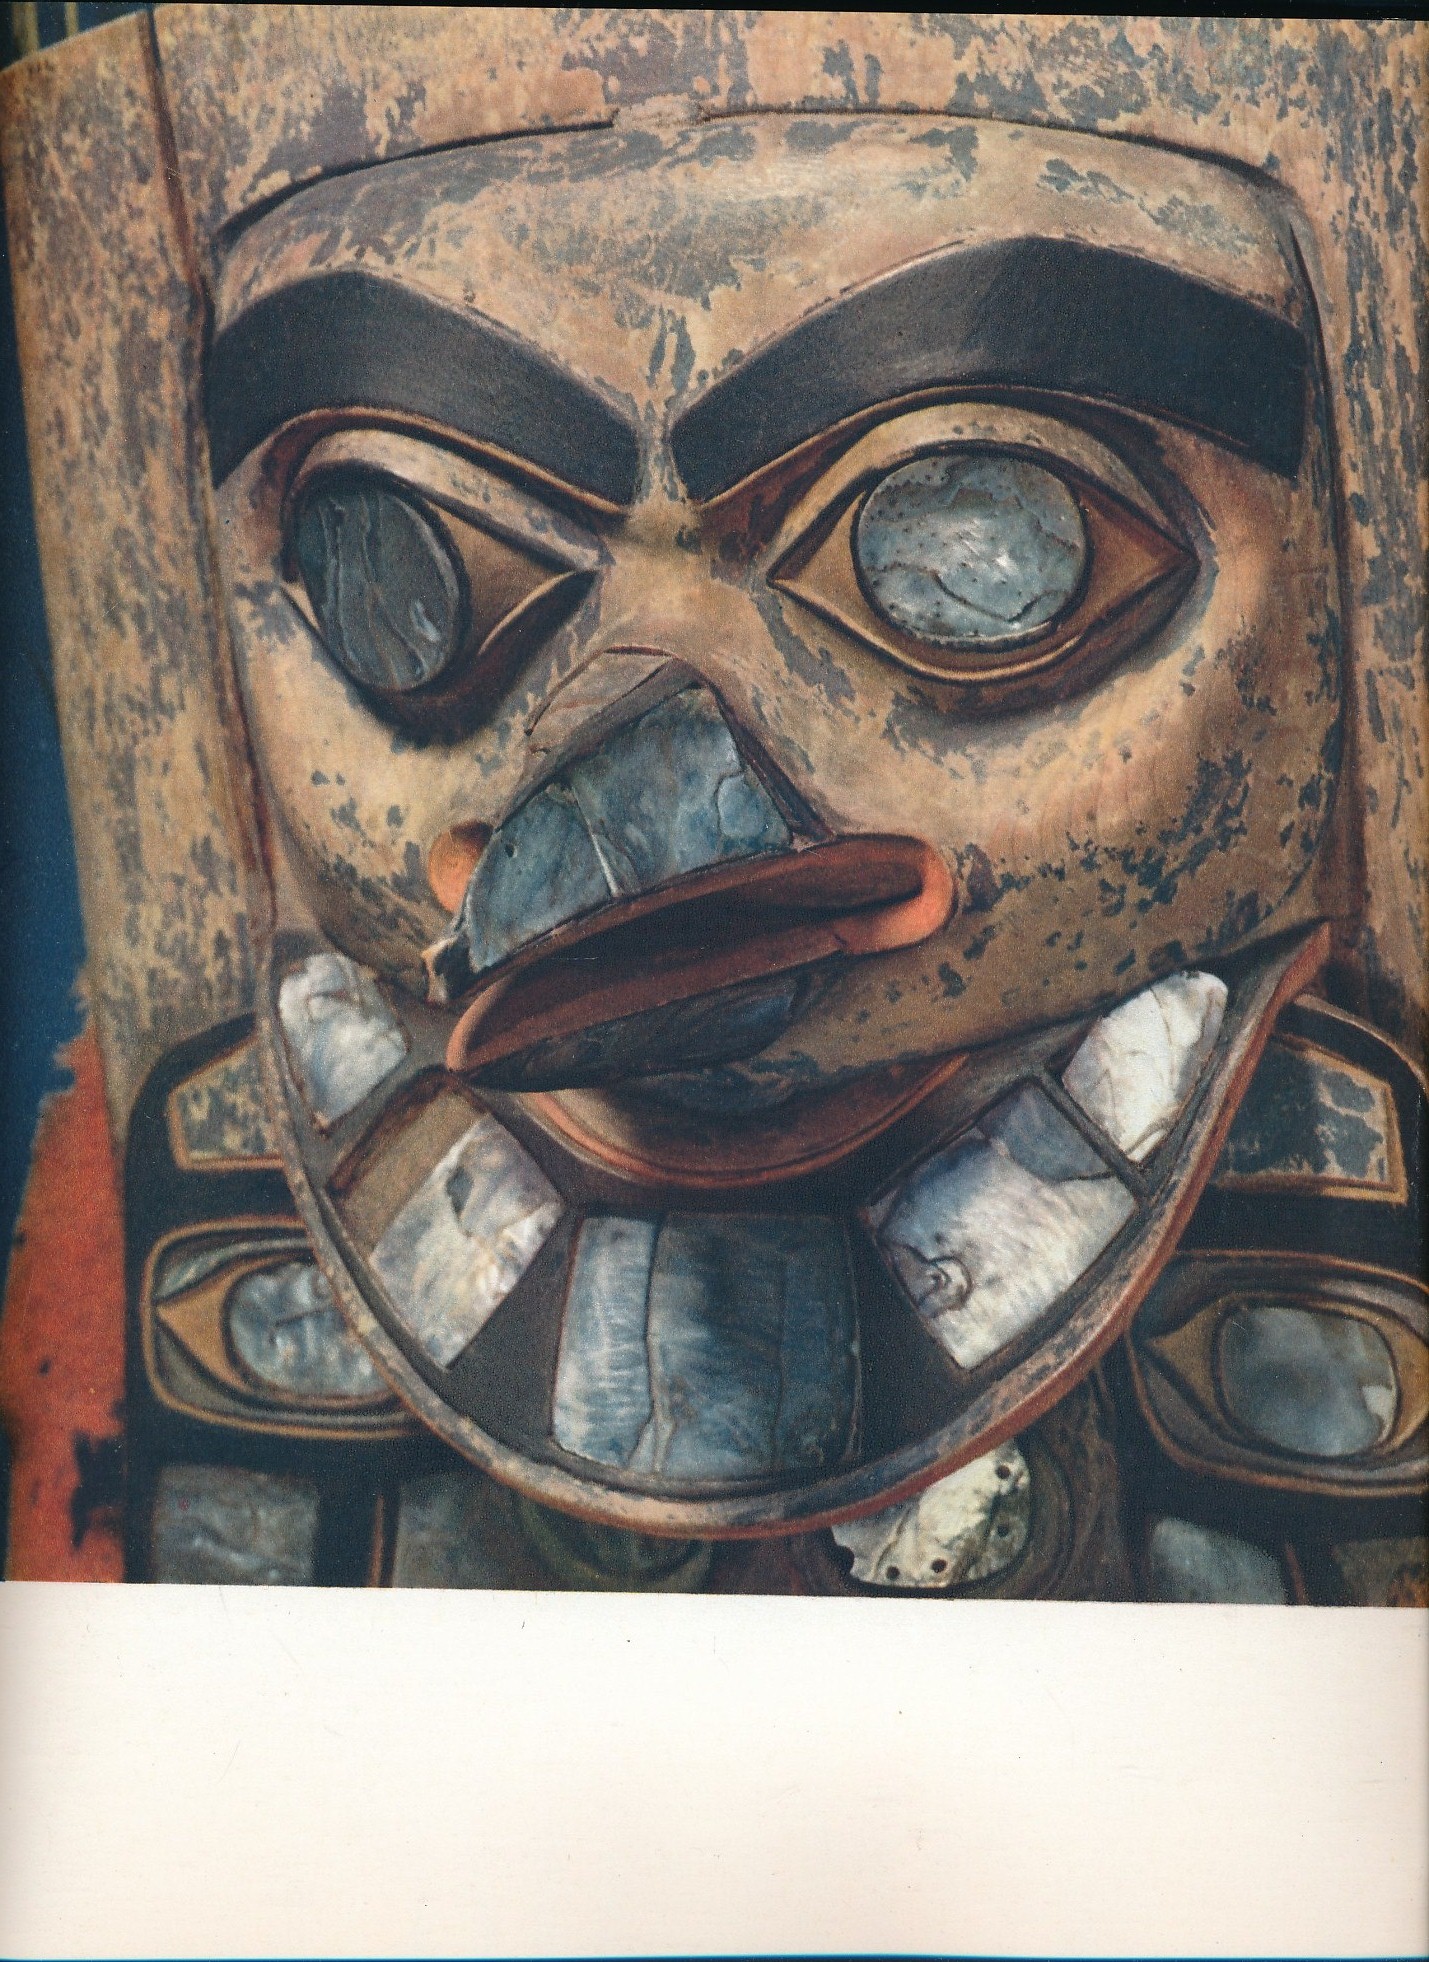 North American Indian Art. Masks, Amulets, Wood Carvings and Ceremonial Dress from the North-West Coast